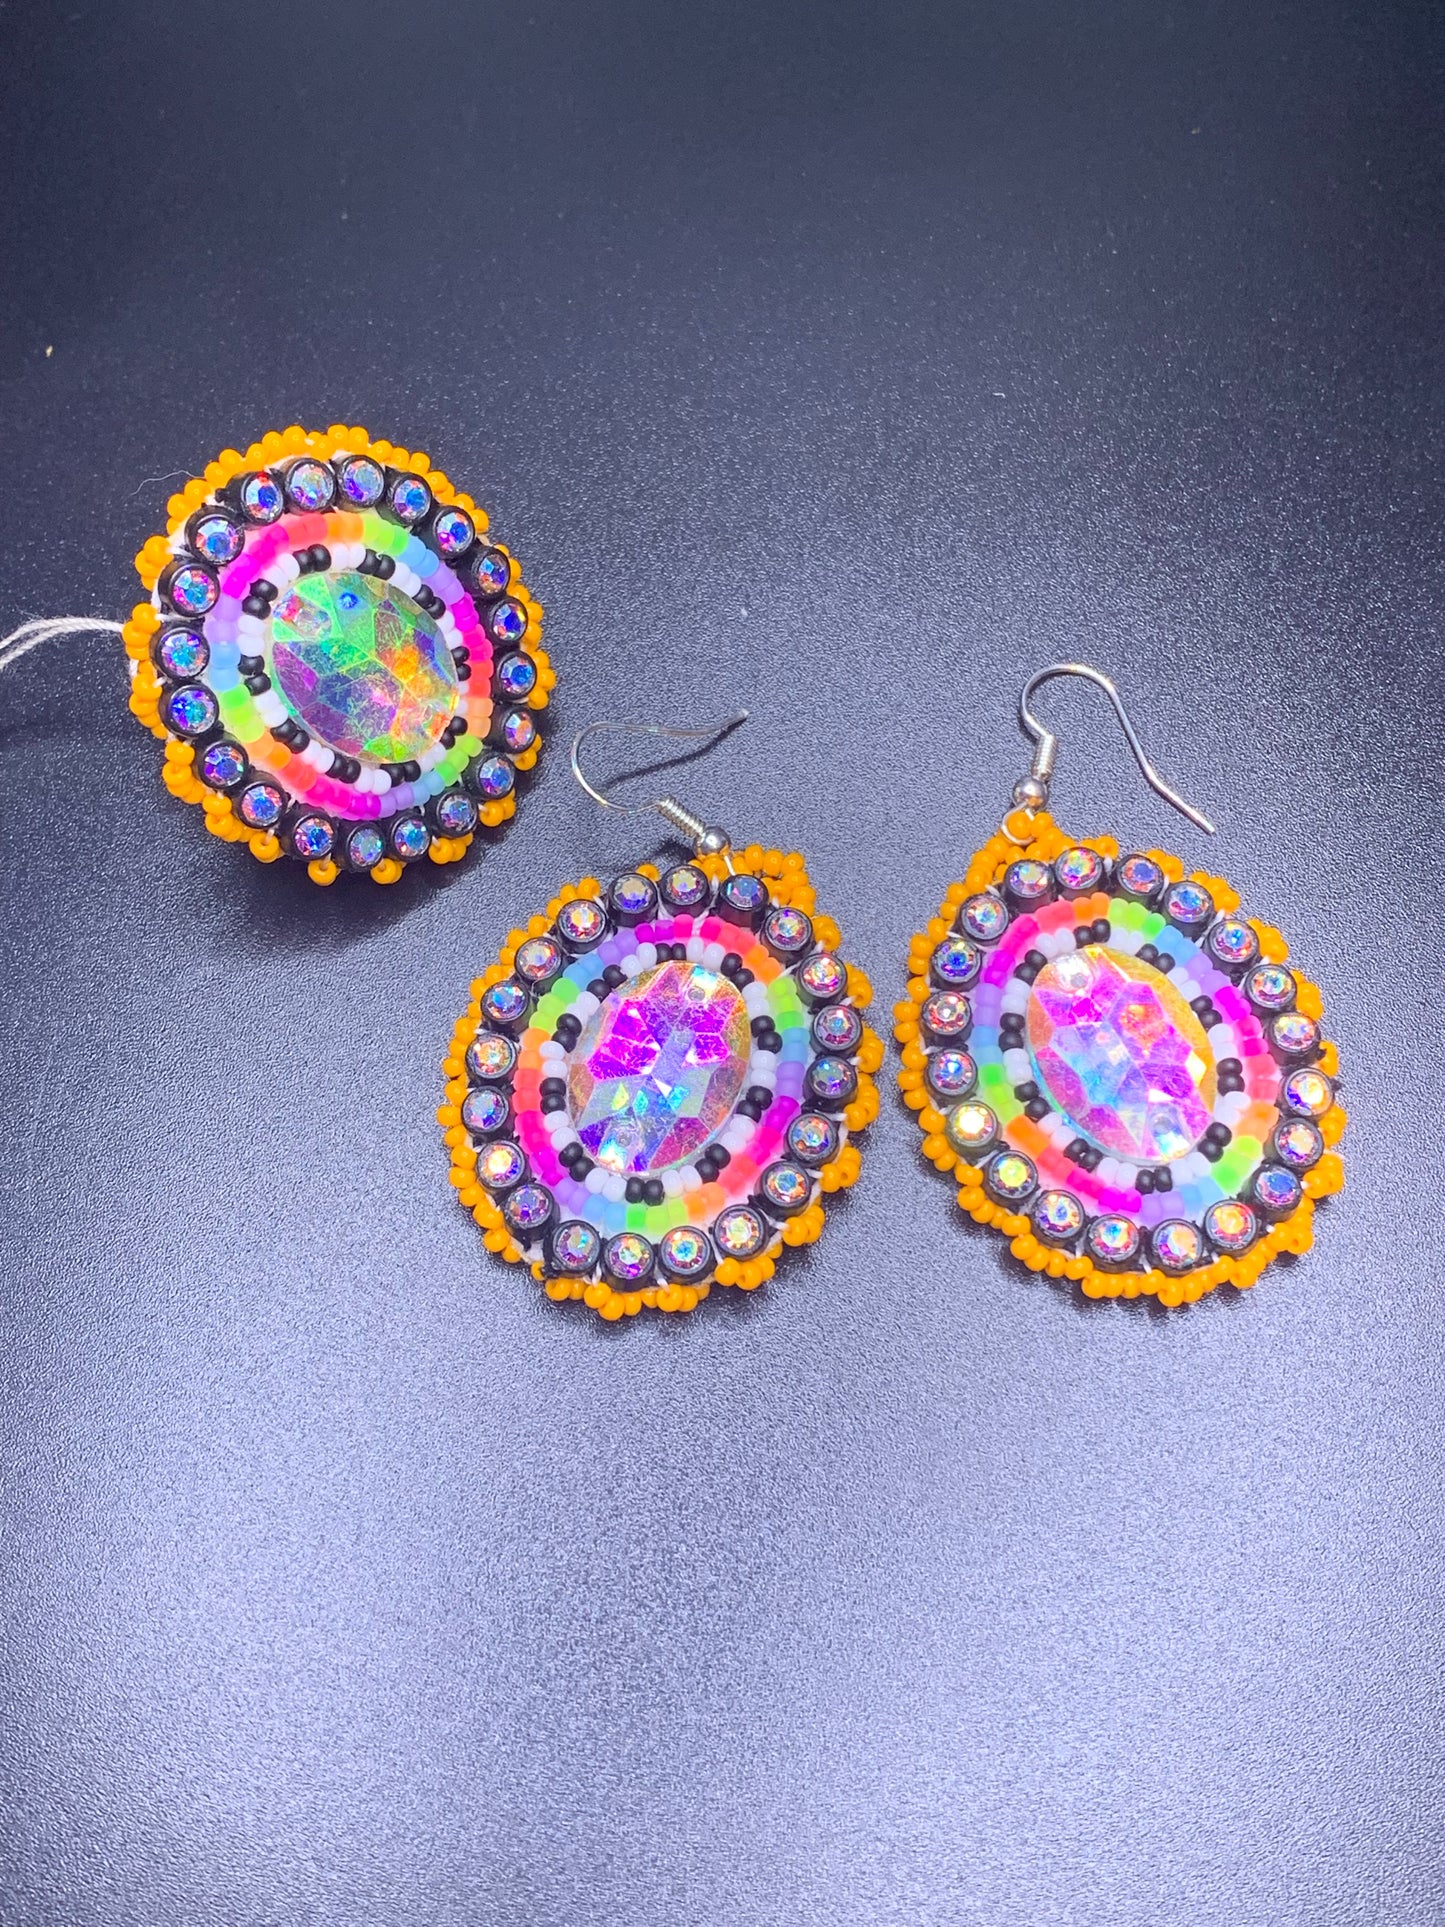 Germaine Thompson - Beaded Dangle Earring and Ring set